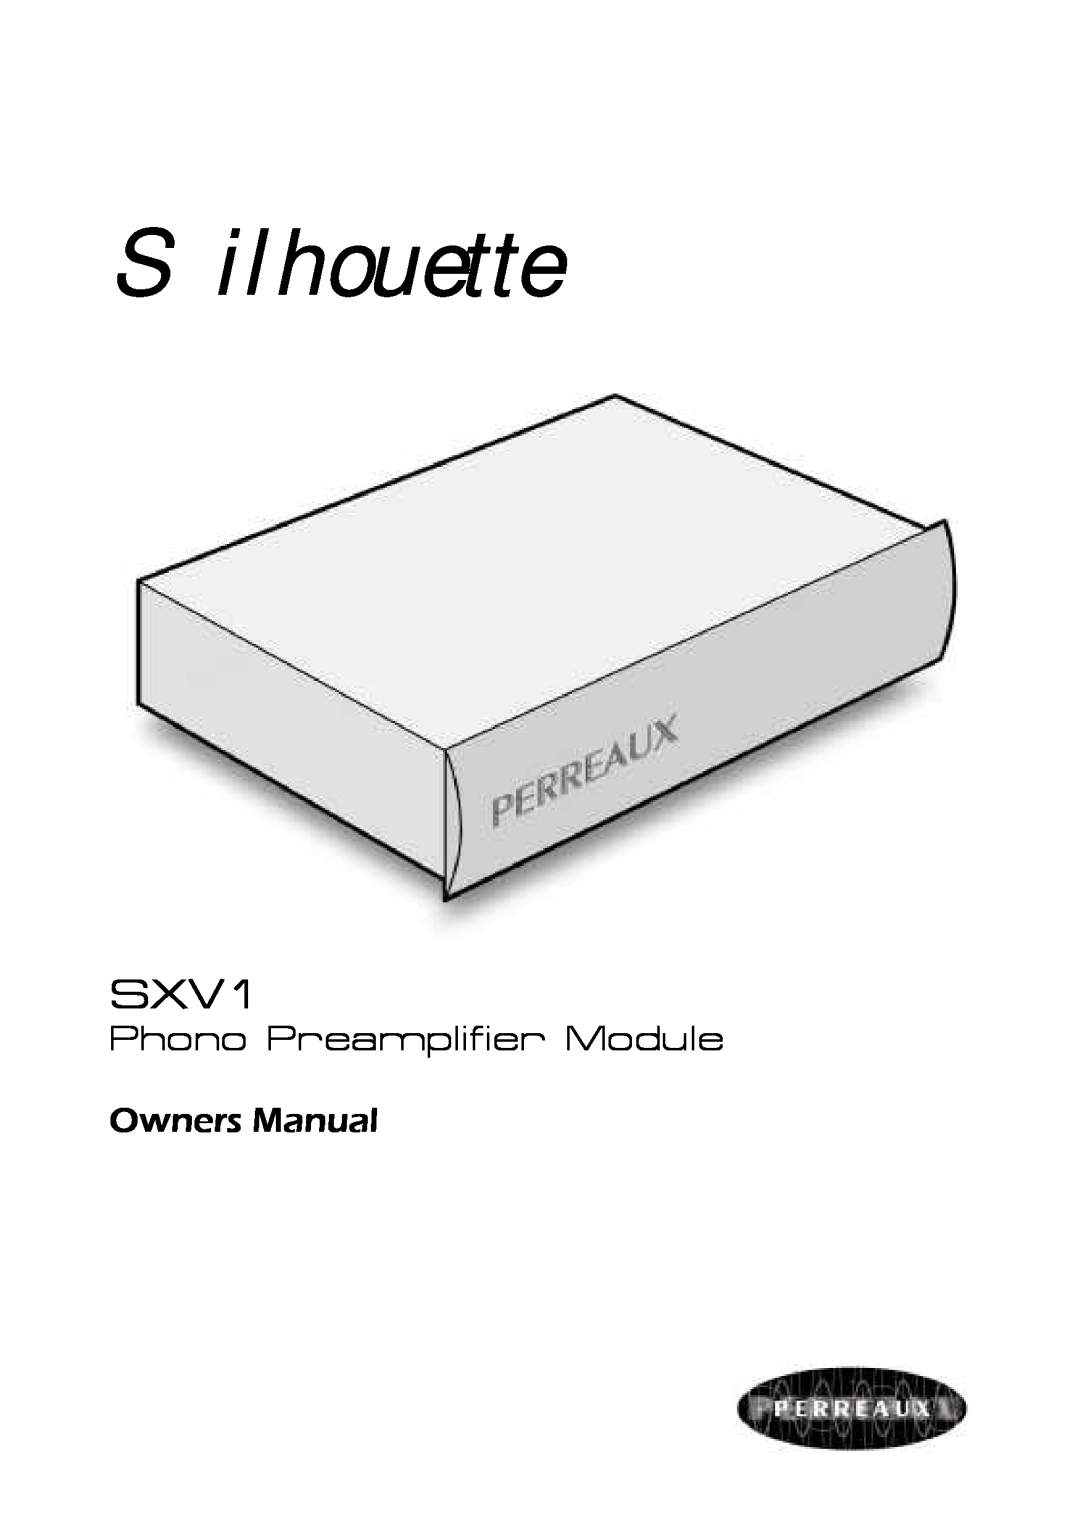 Perreaux SXV1 owner manual Phono Preamplifier Module Owners Manual, Silhouette 